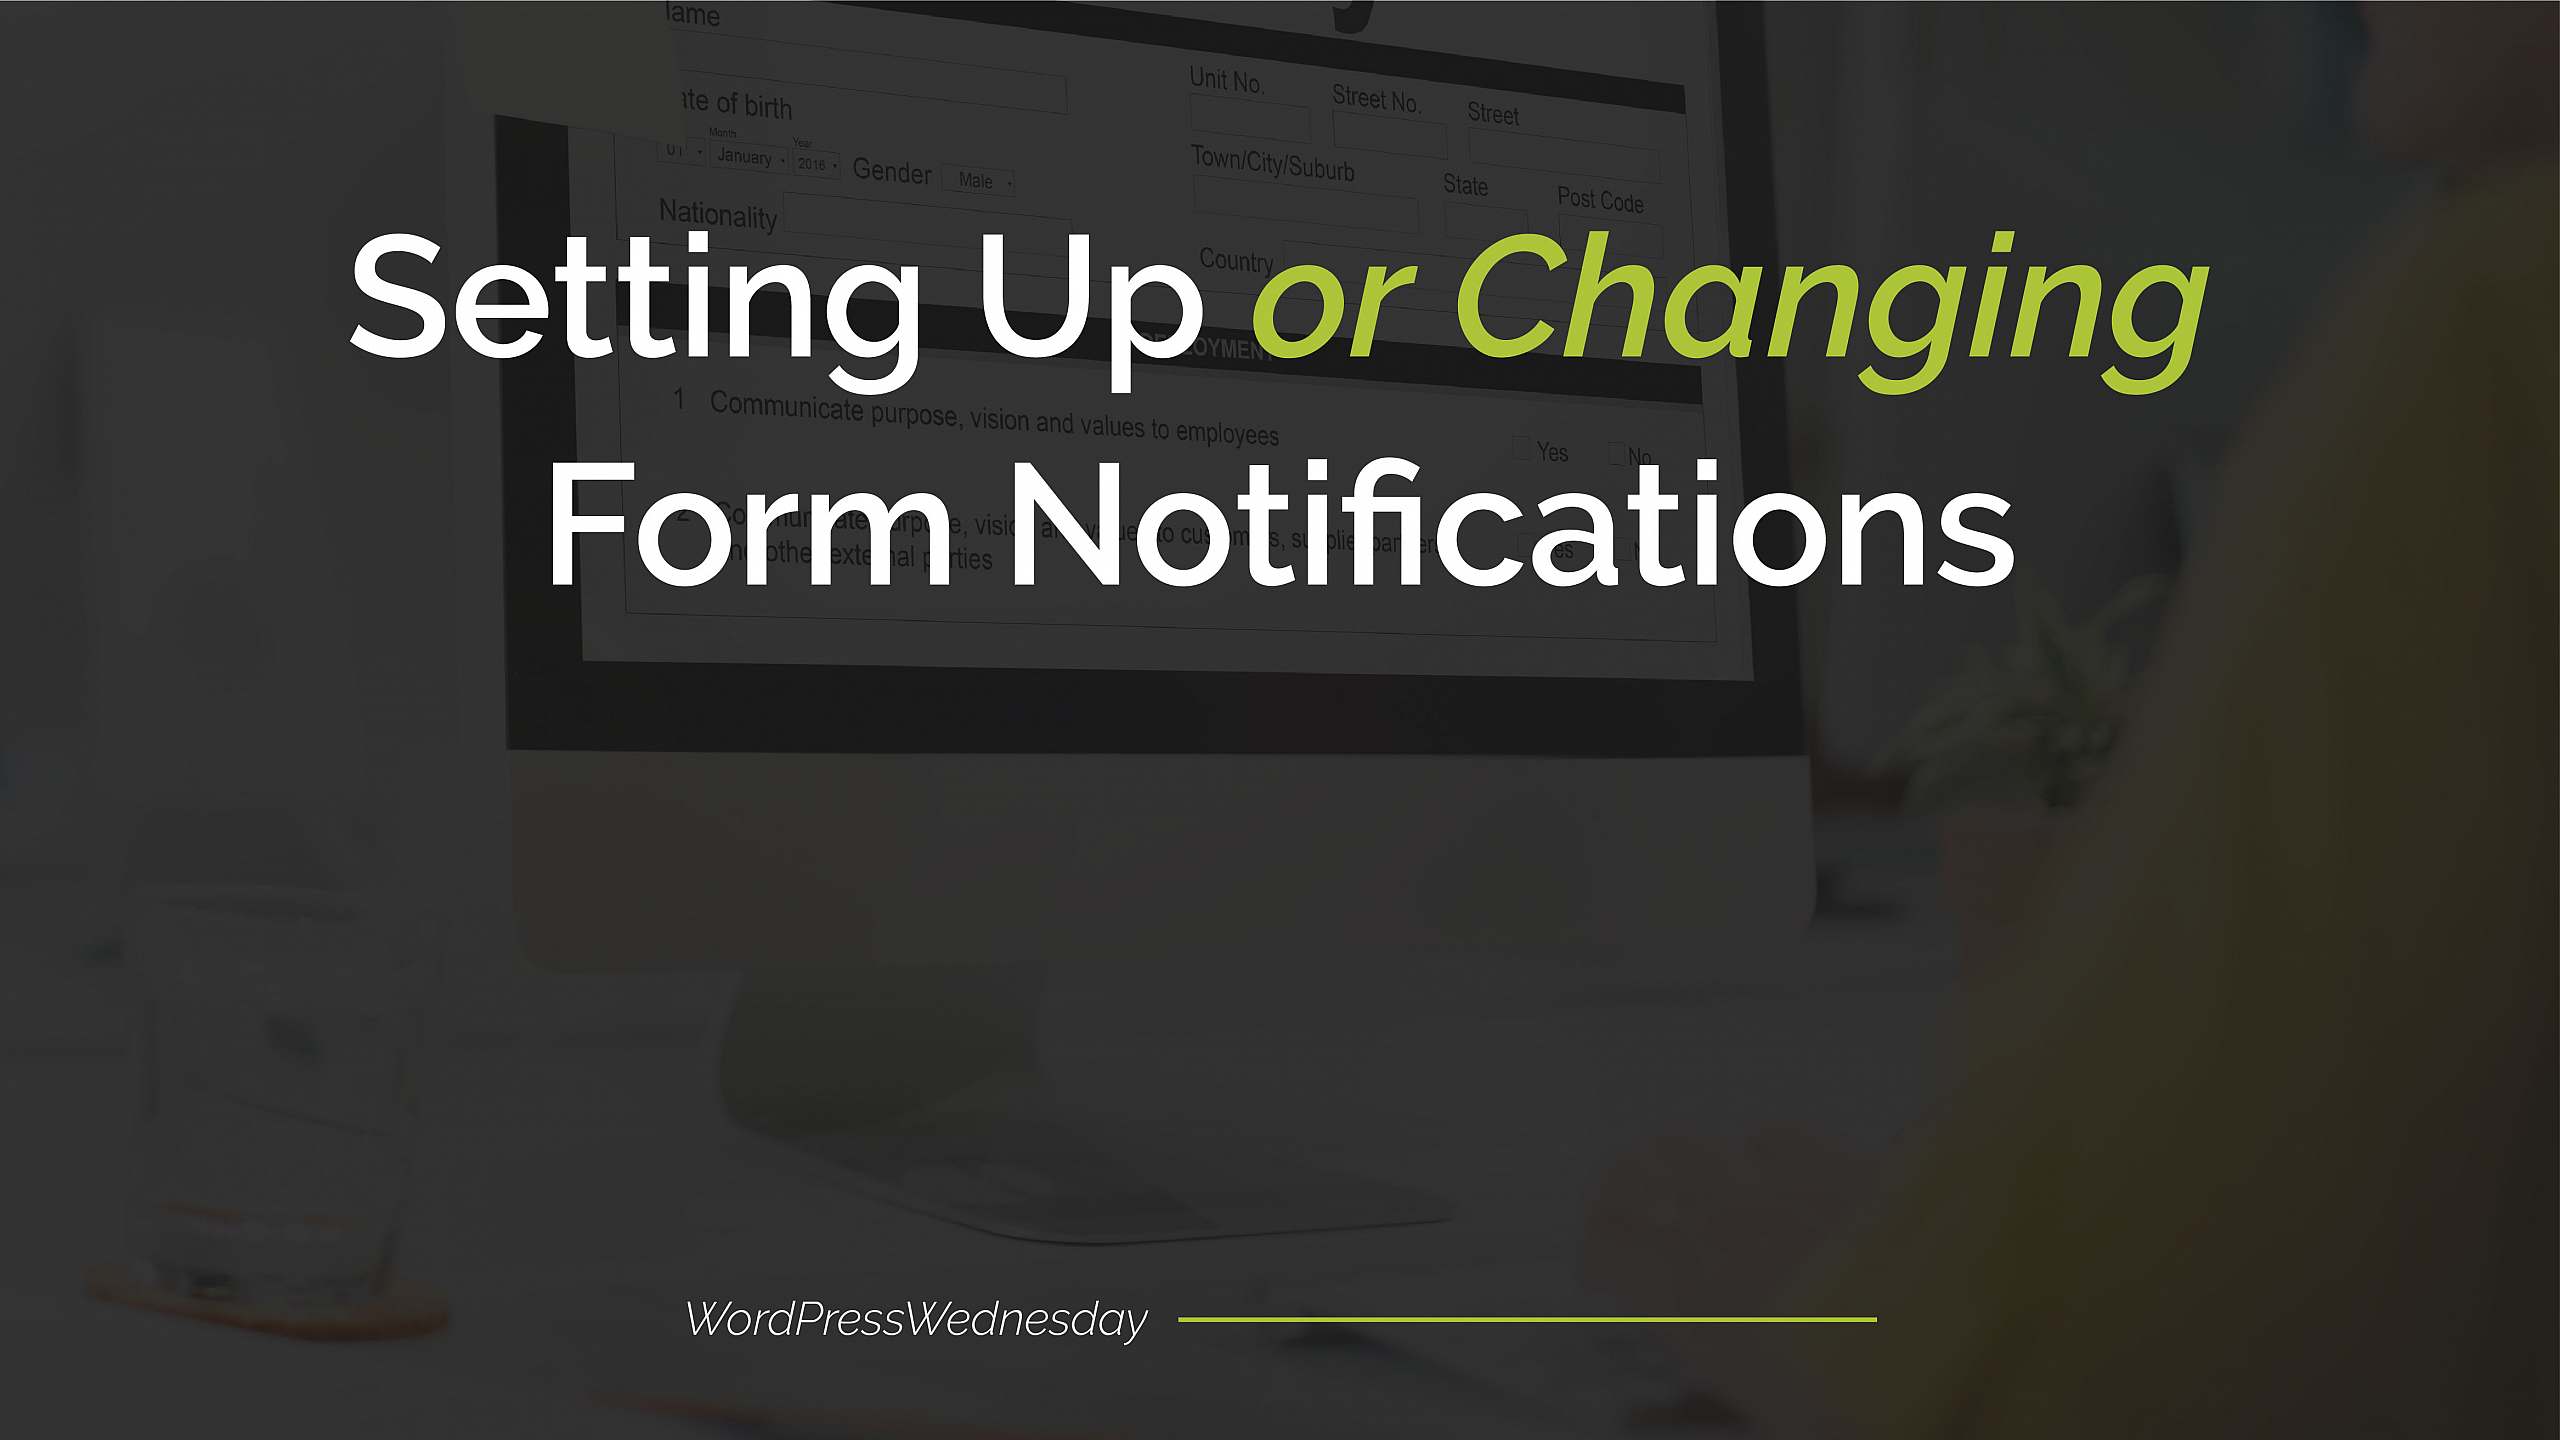 update-old-blog-post5_WordPress Wednesday Tip 16- Setting Up or Changing Form Notifications